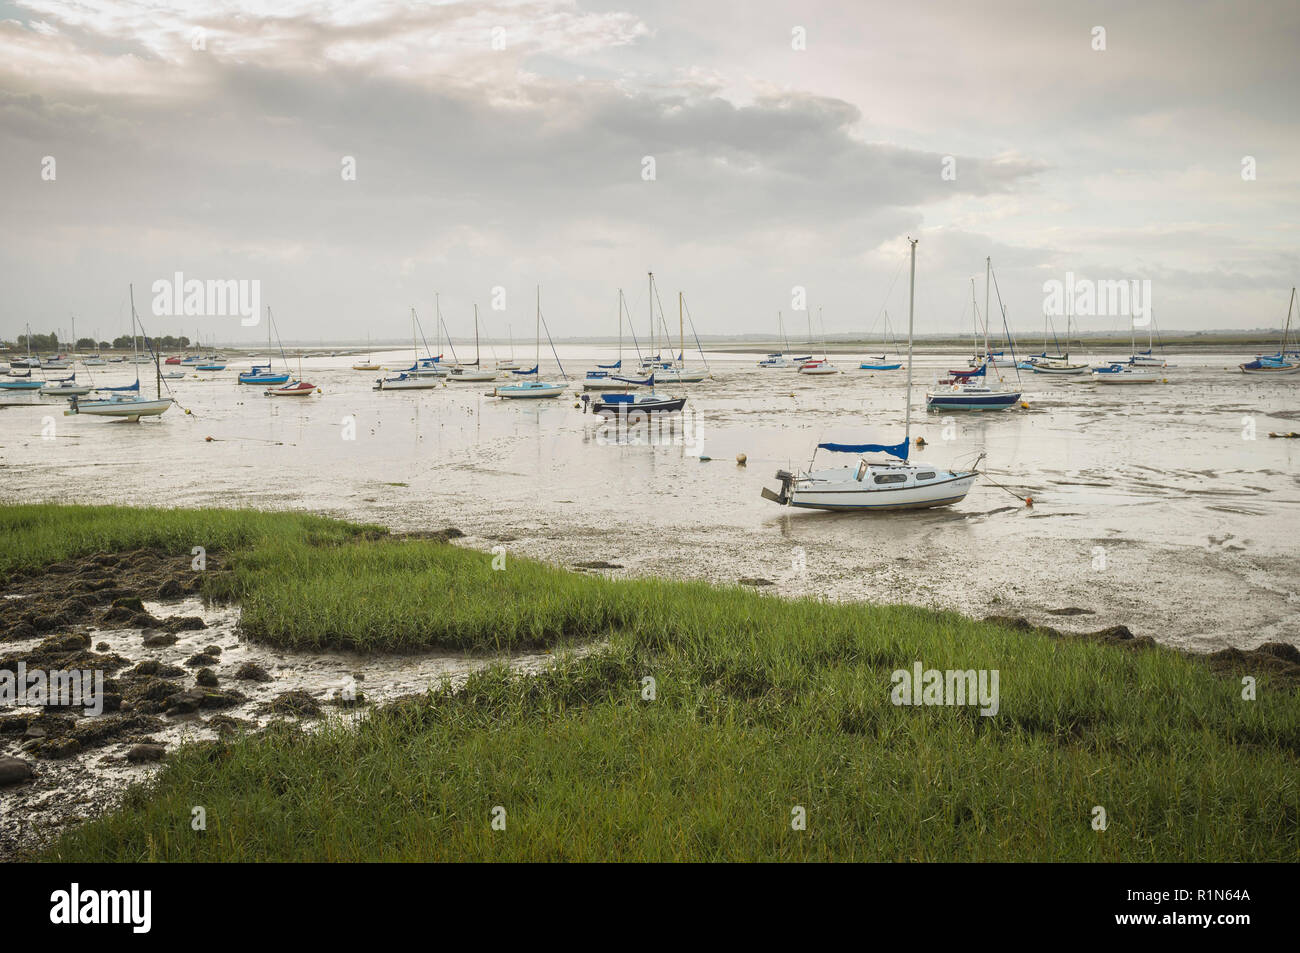 View to Osea Island and the estuary of the River Blackwater, Maldon, Essex with yachts at low tide Stock Photo